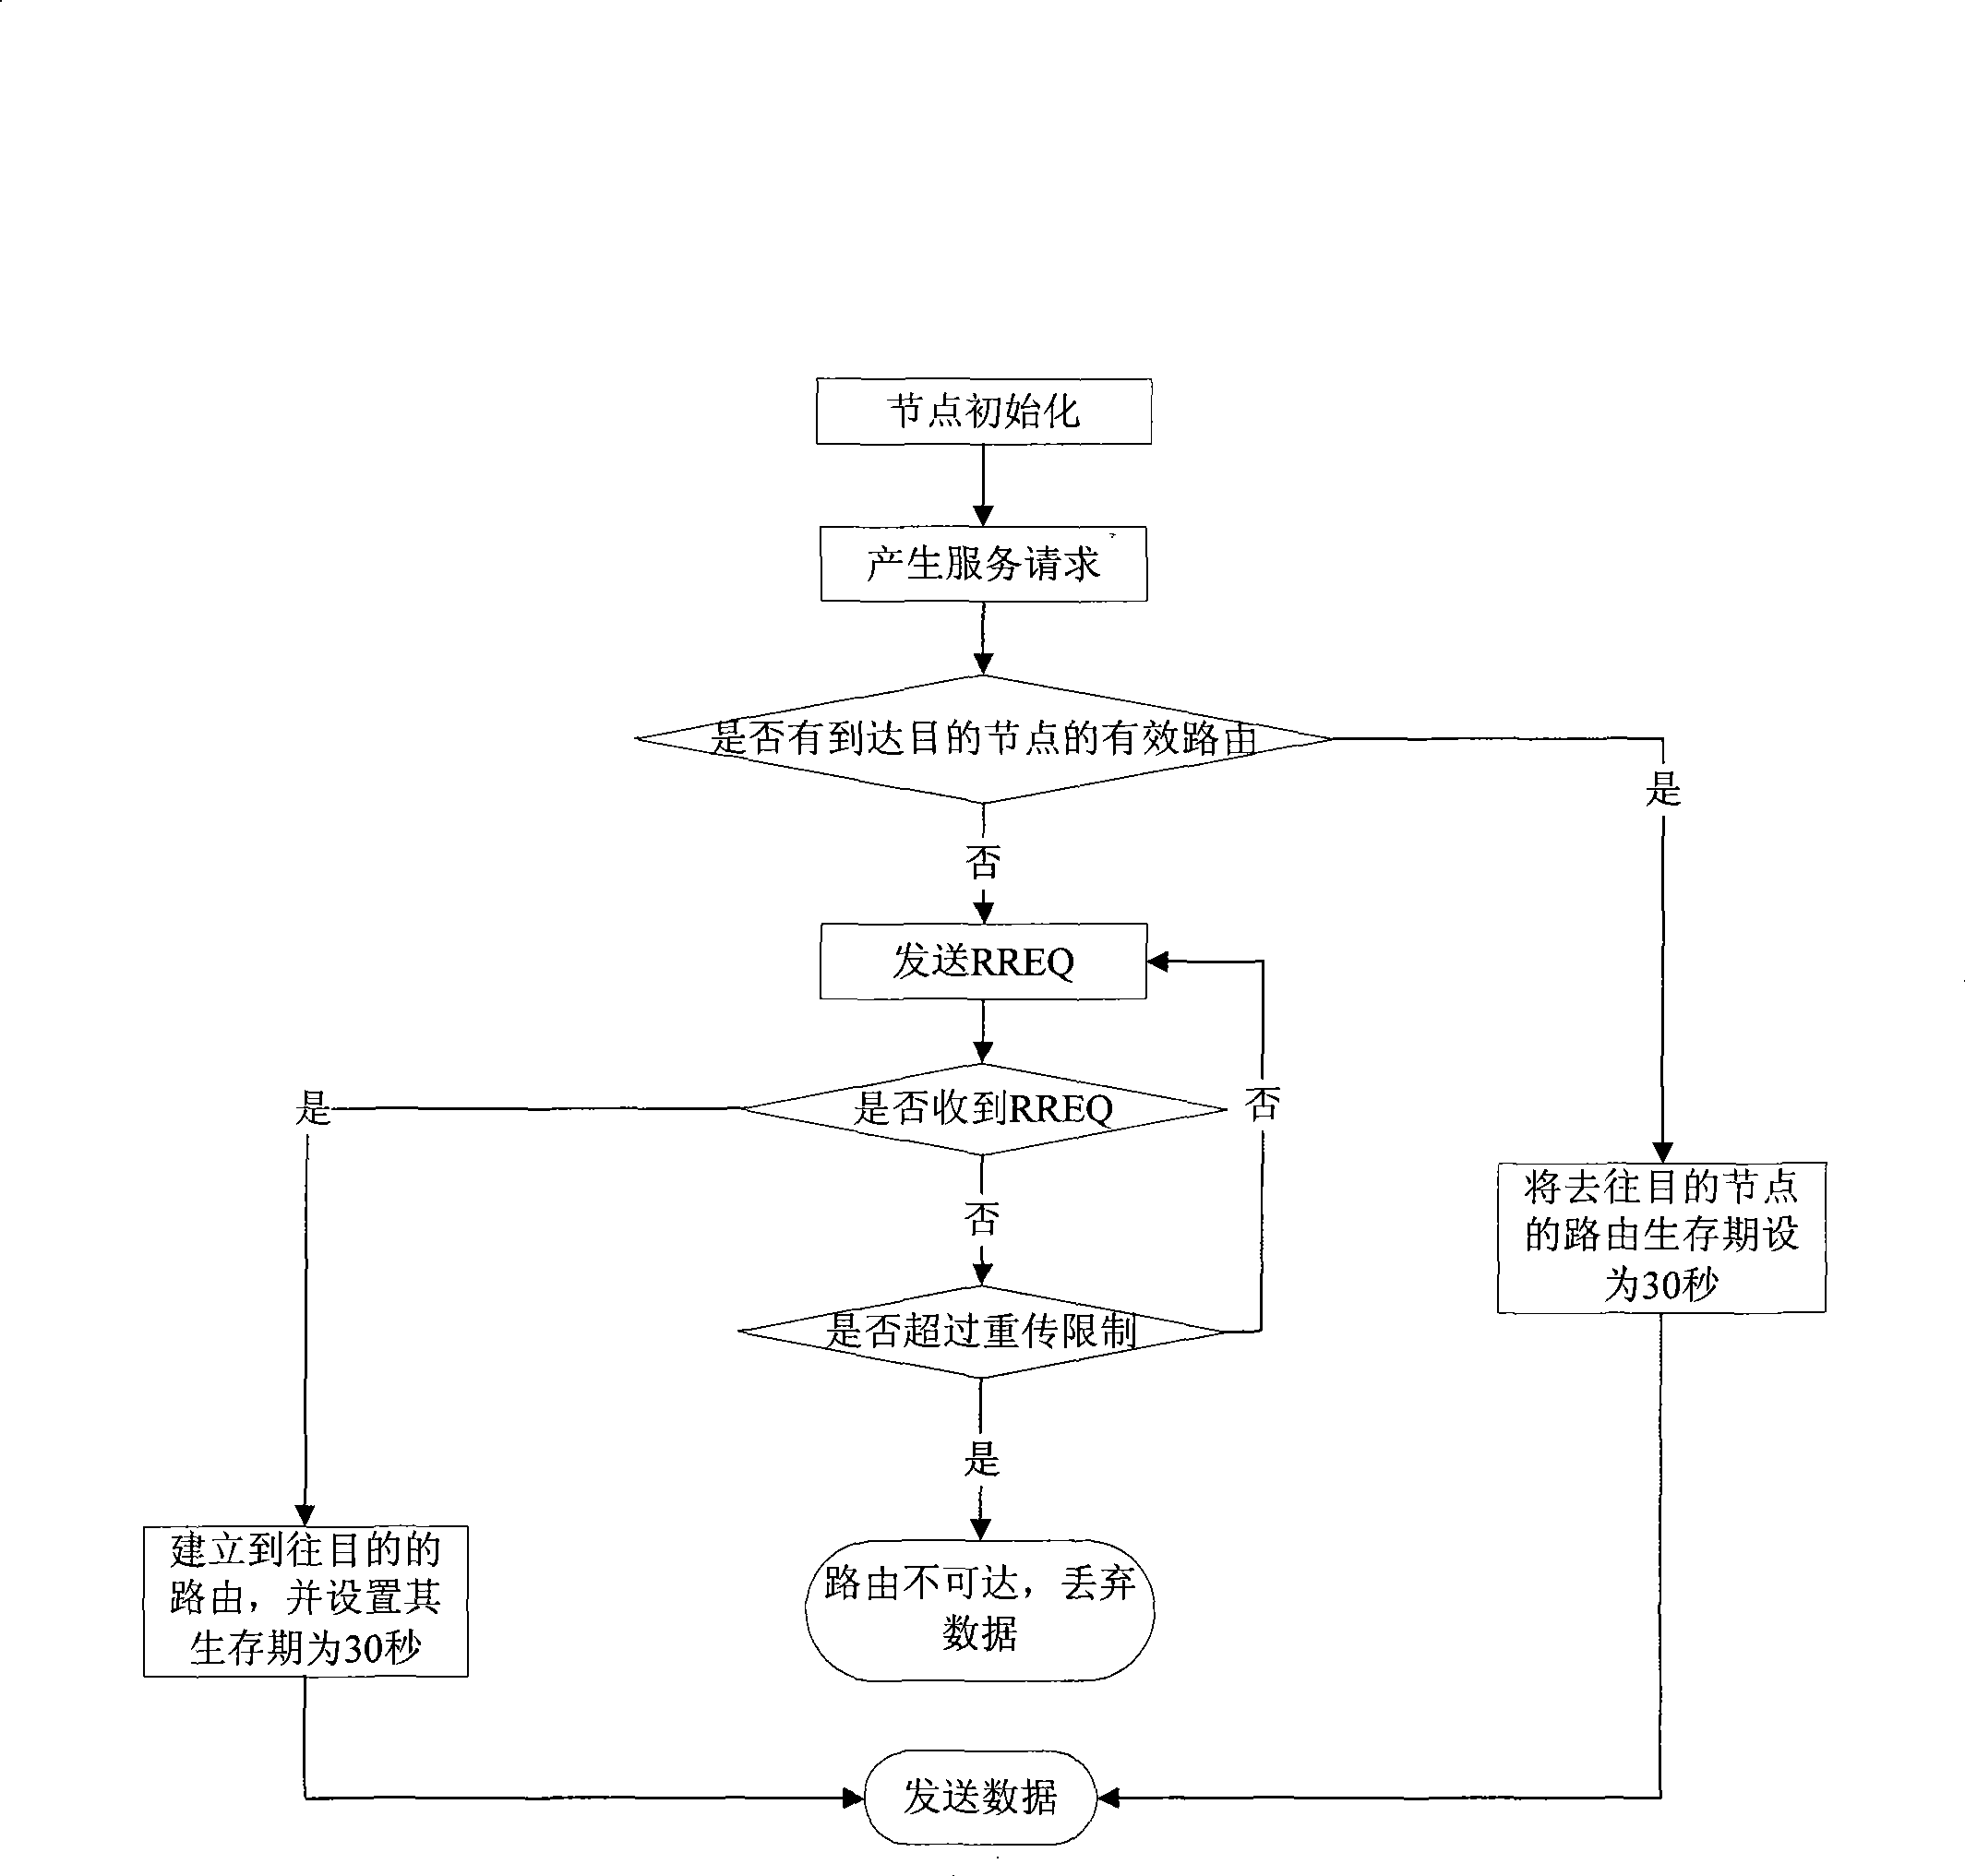 Method for selecting route of vehicle-mounted mobile ad hoc network based on direction information